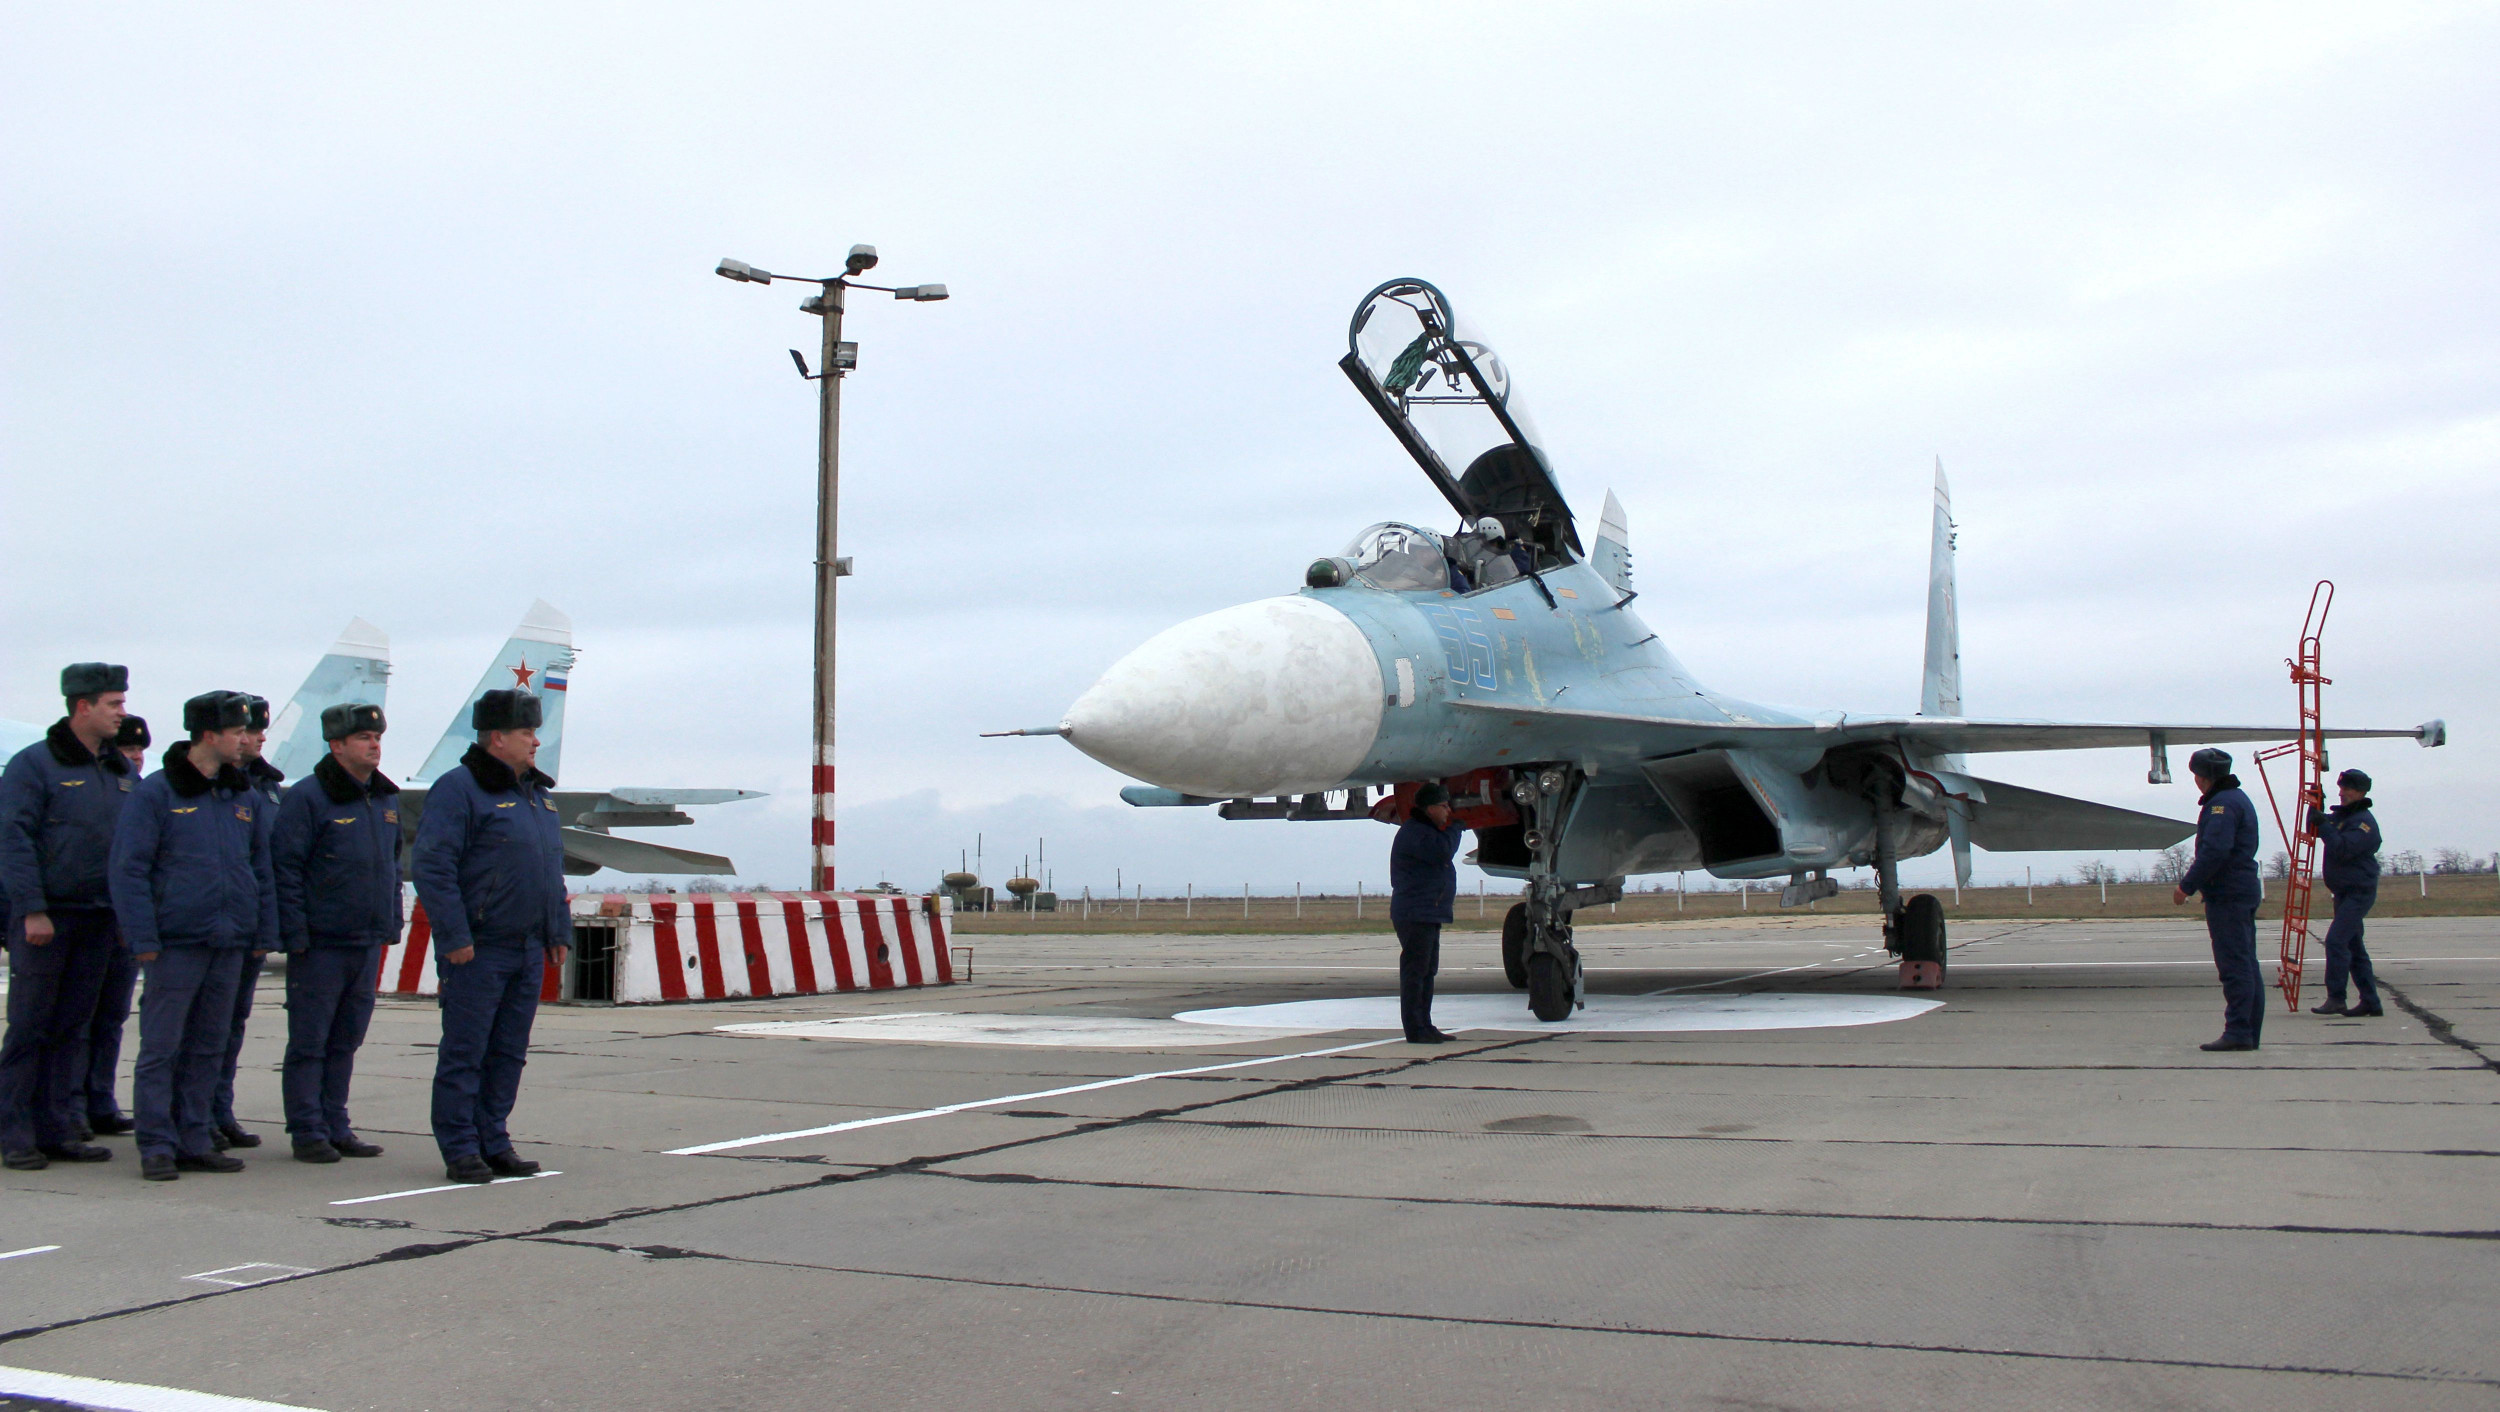 Explosions Force Russia to Pull Planes From Crimean Airbases: Ukraine – Newsweek